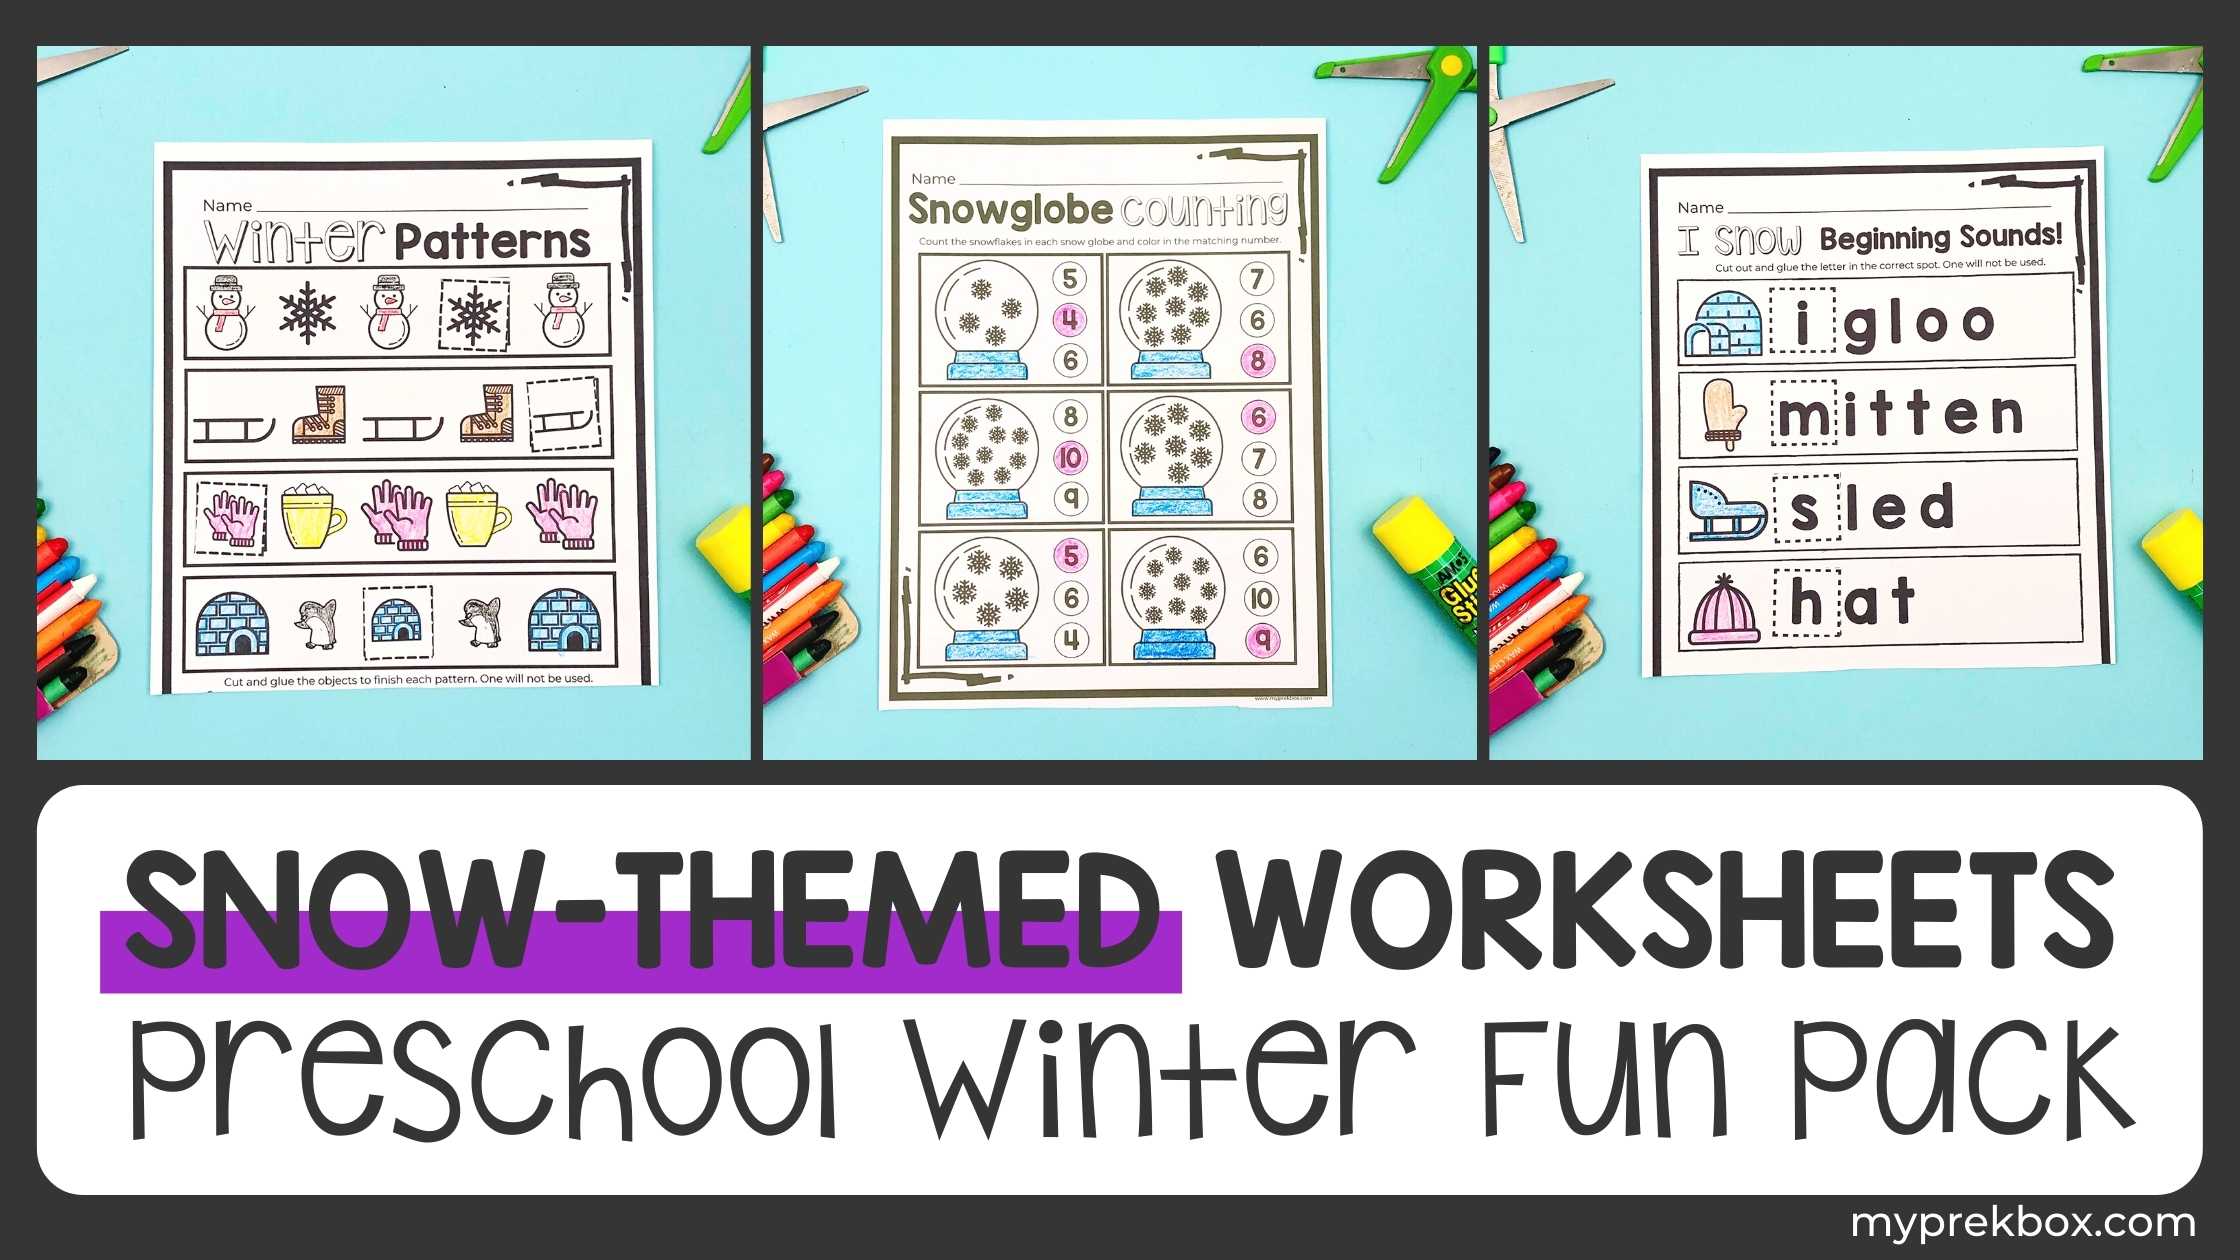 Winter Clothes Activities for Preschoolers - Simply Full of Delight